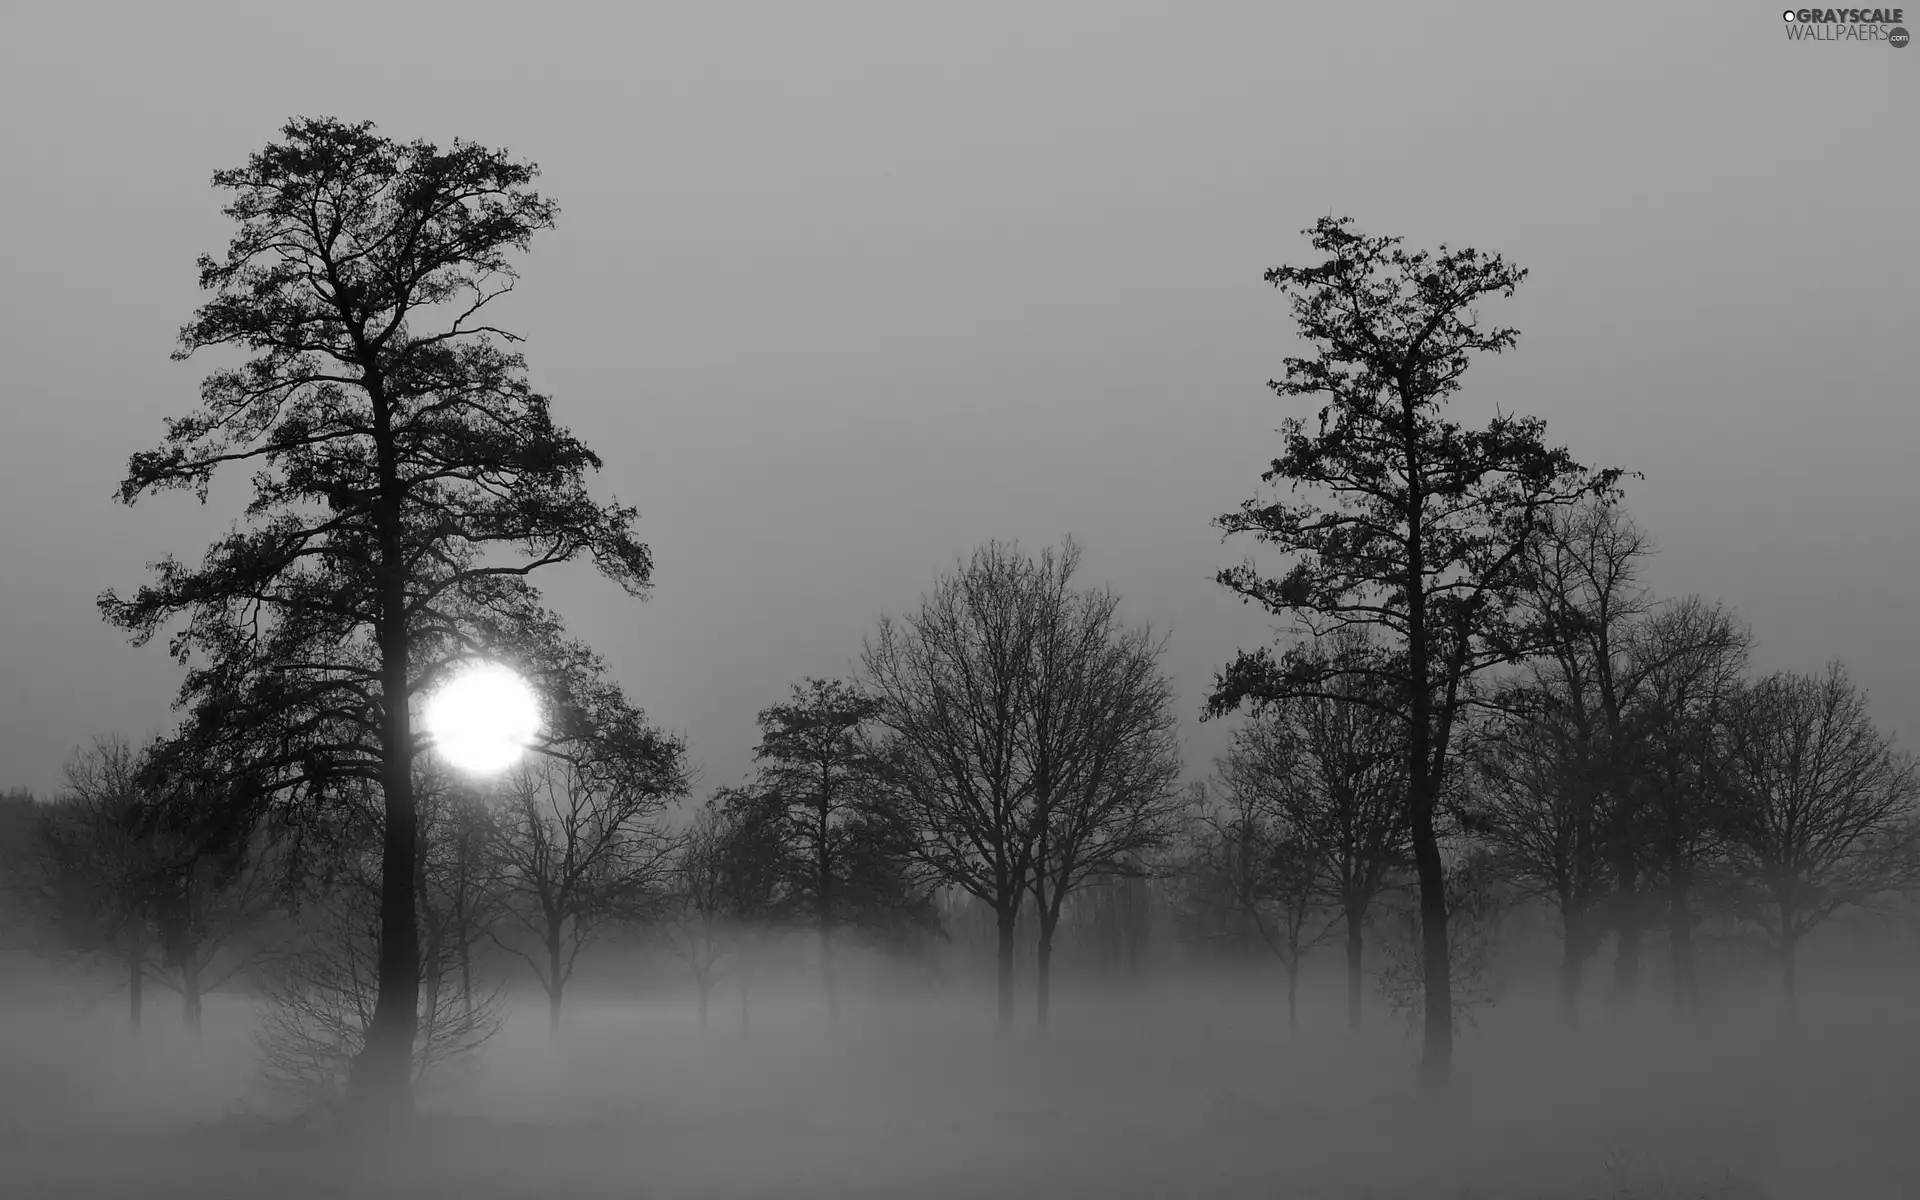 viewes, Fog, sun, trees, west